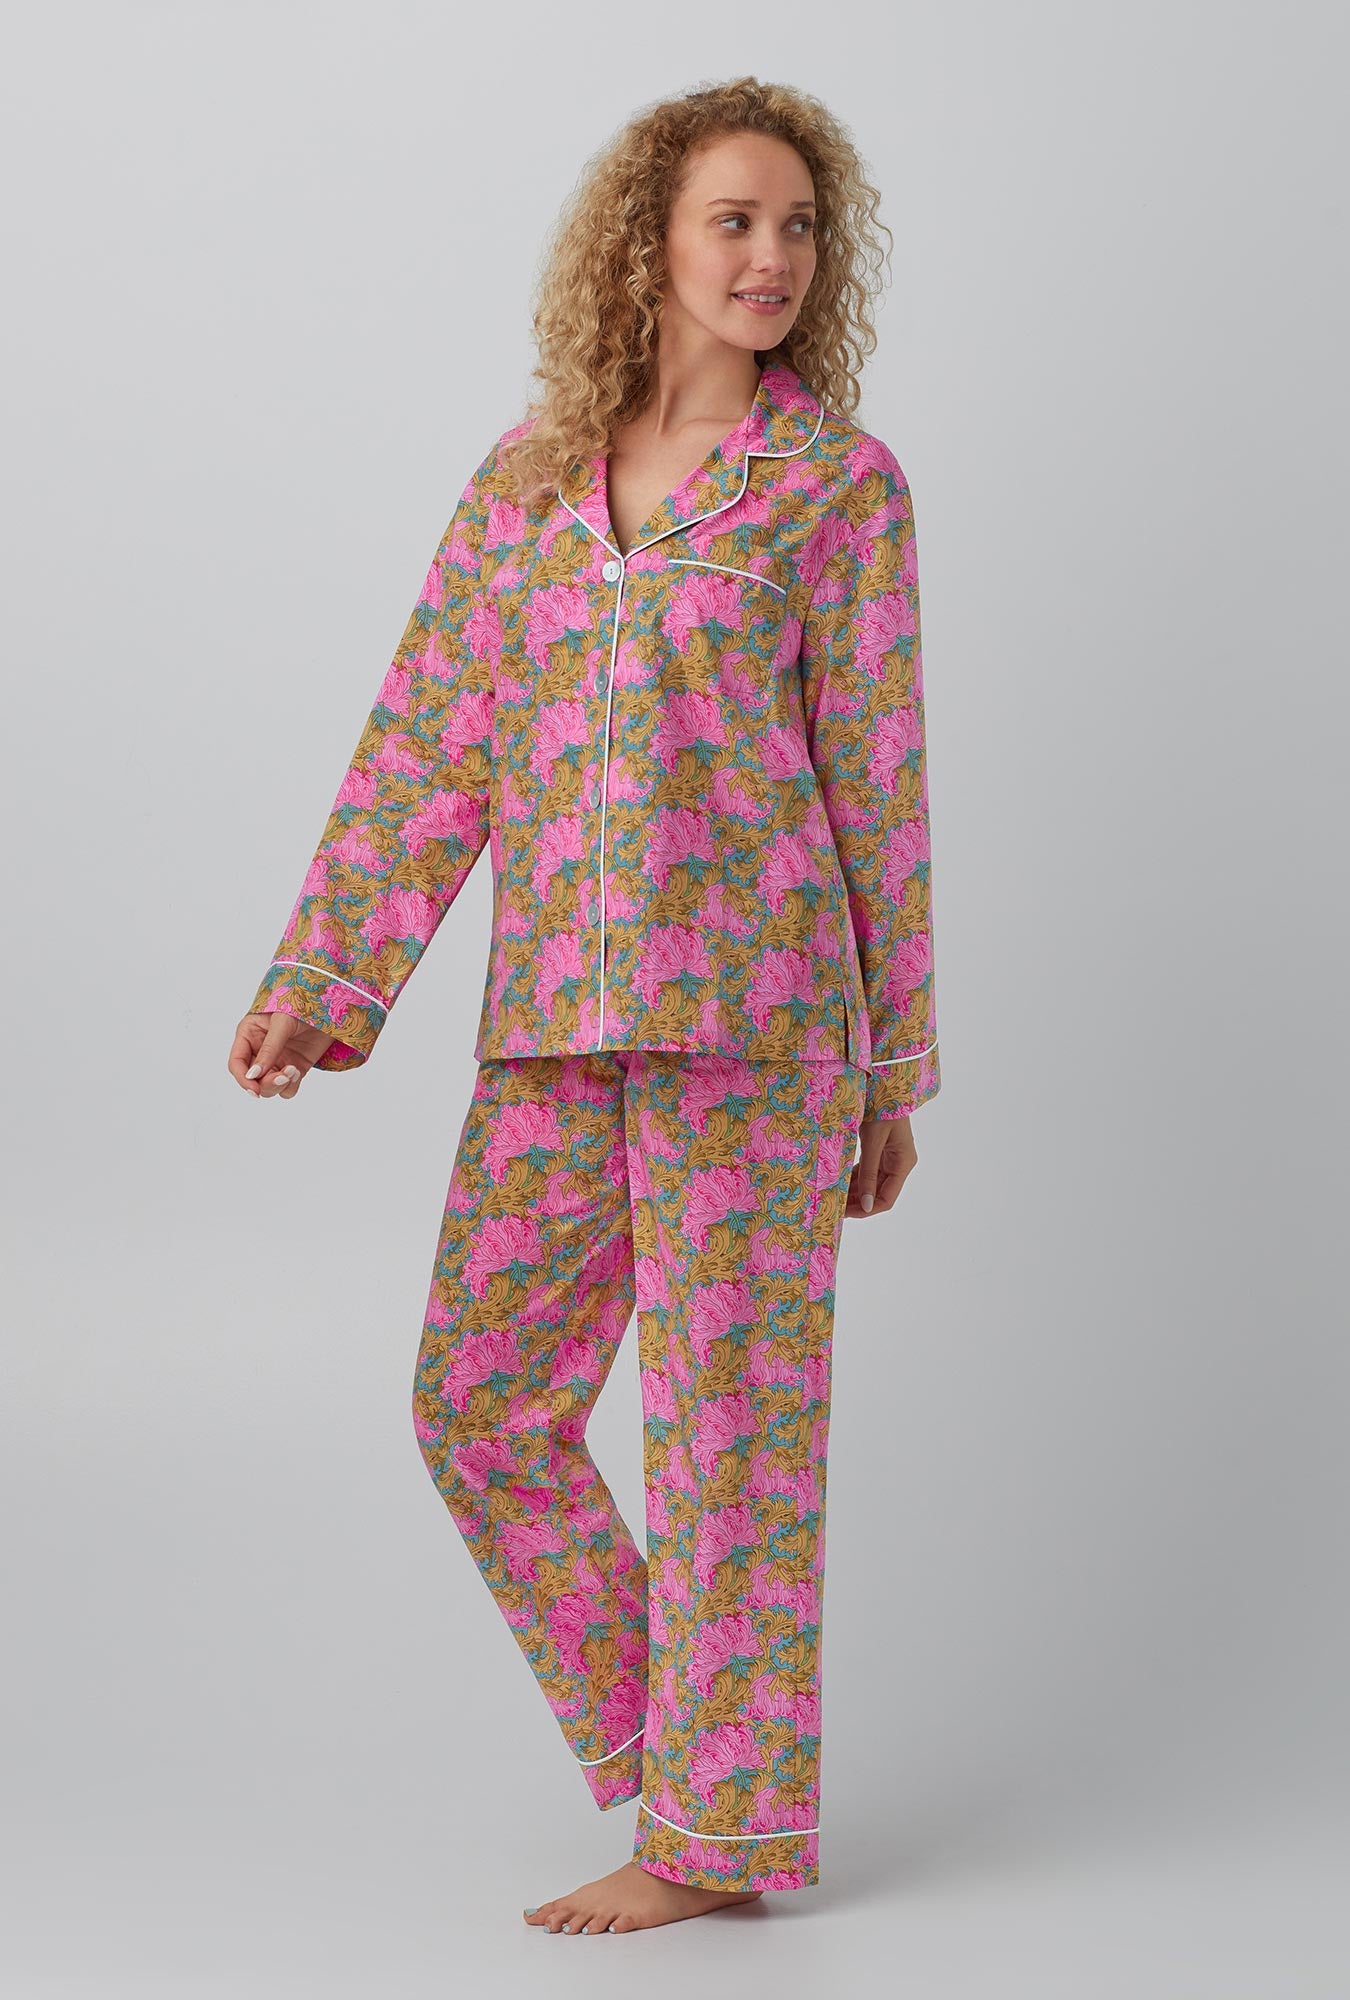 A lady wearing Laura's Reverie Long Sleeve Classic Woven Cotton Tana Lawn® PJ Set Made with Liberty Fabrics